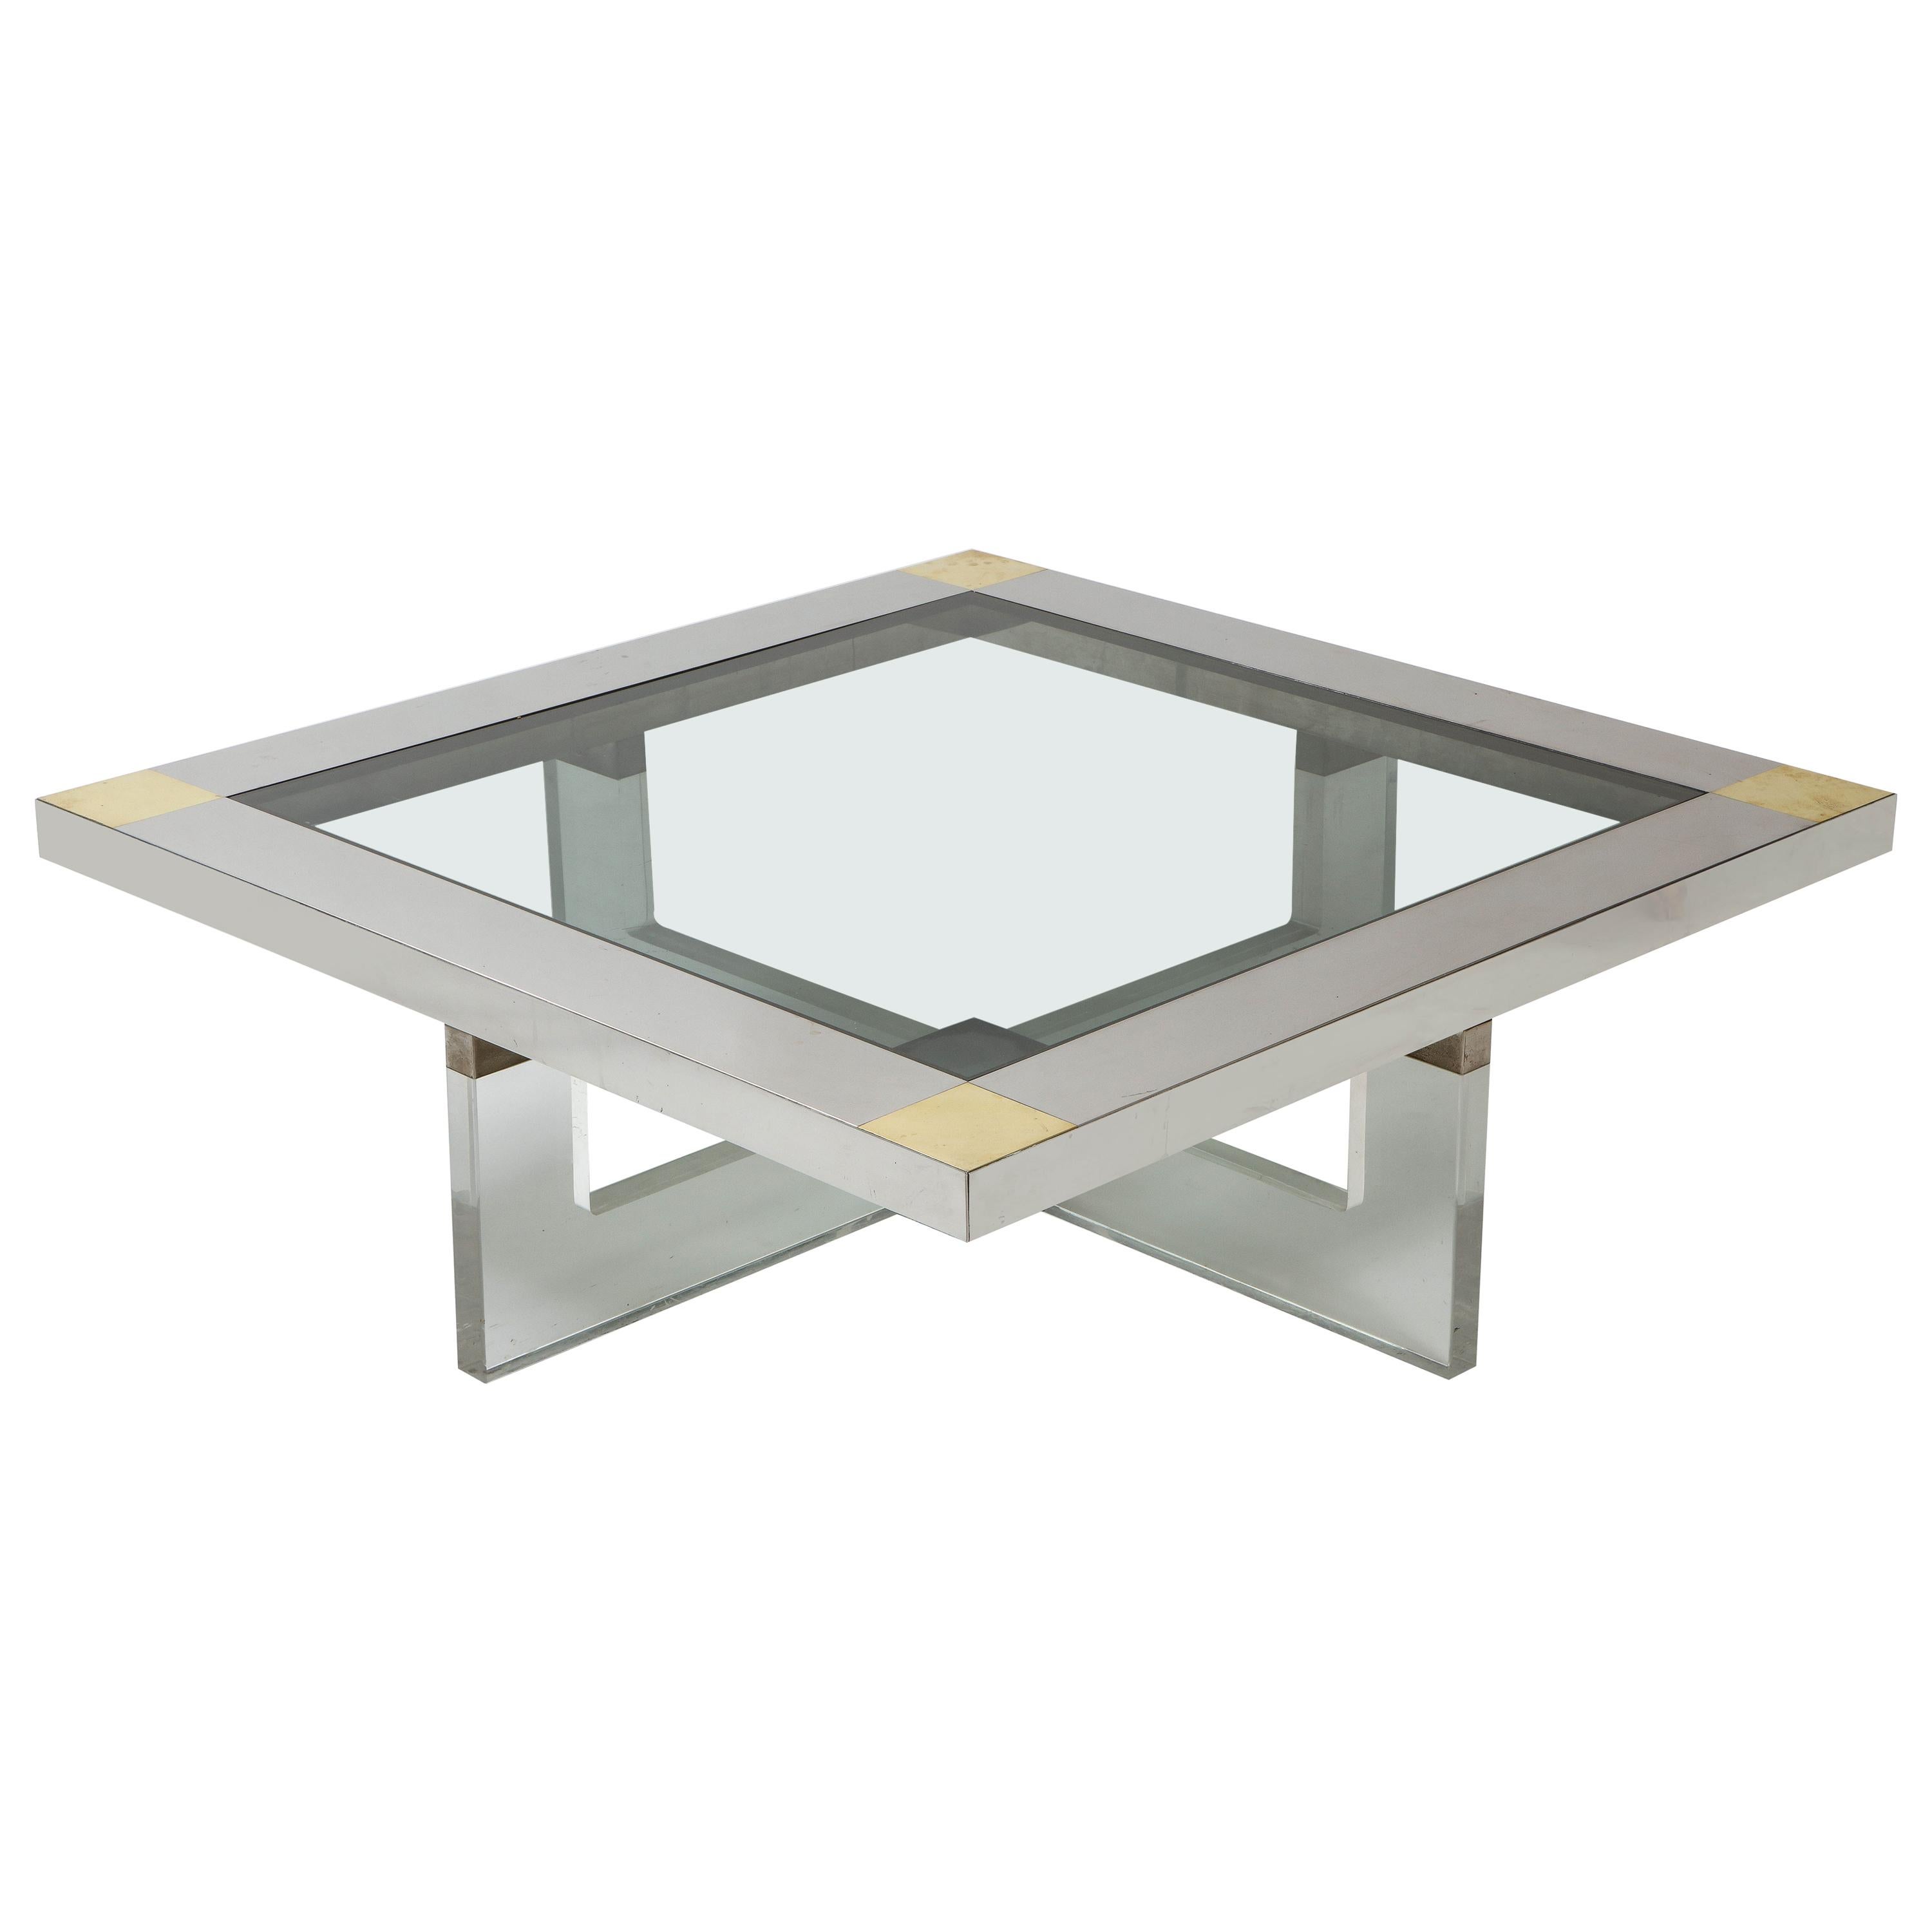 Italian Monumental Square Coffee Table, Chrome, Brass and Plexiglass, 1970s, Italy For Sale